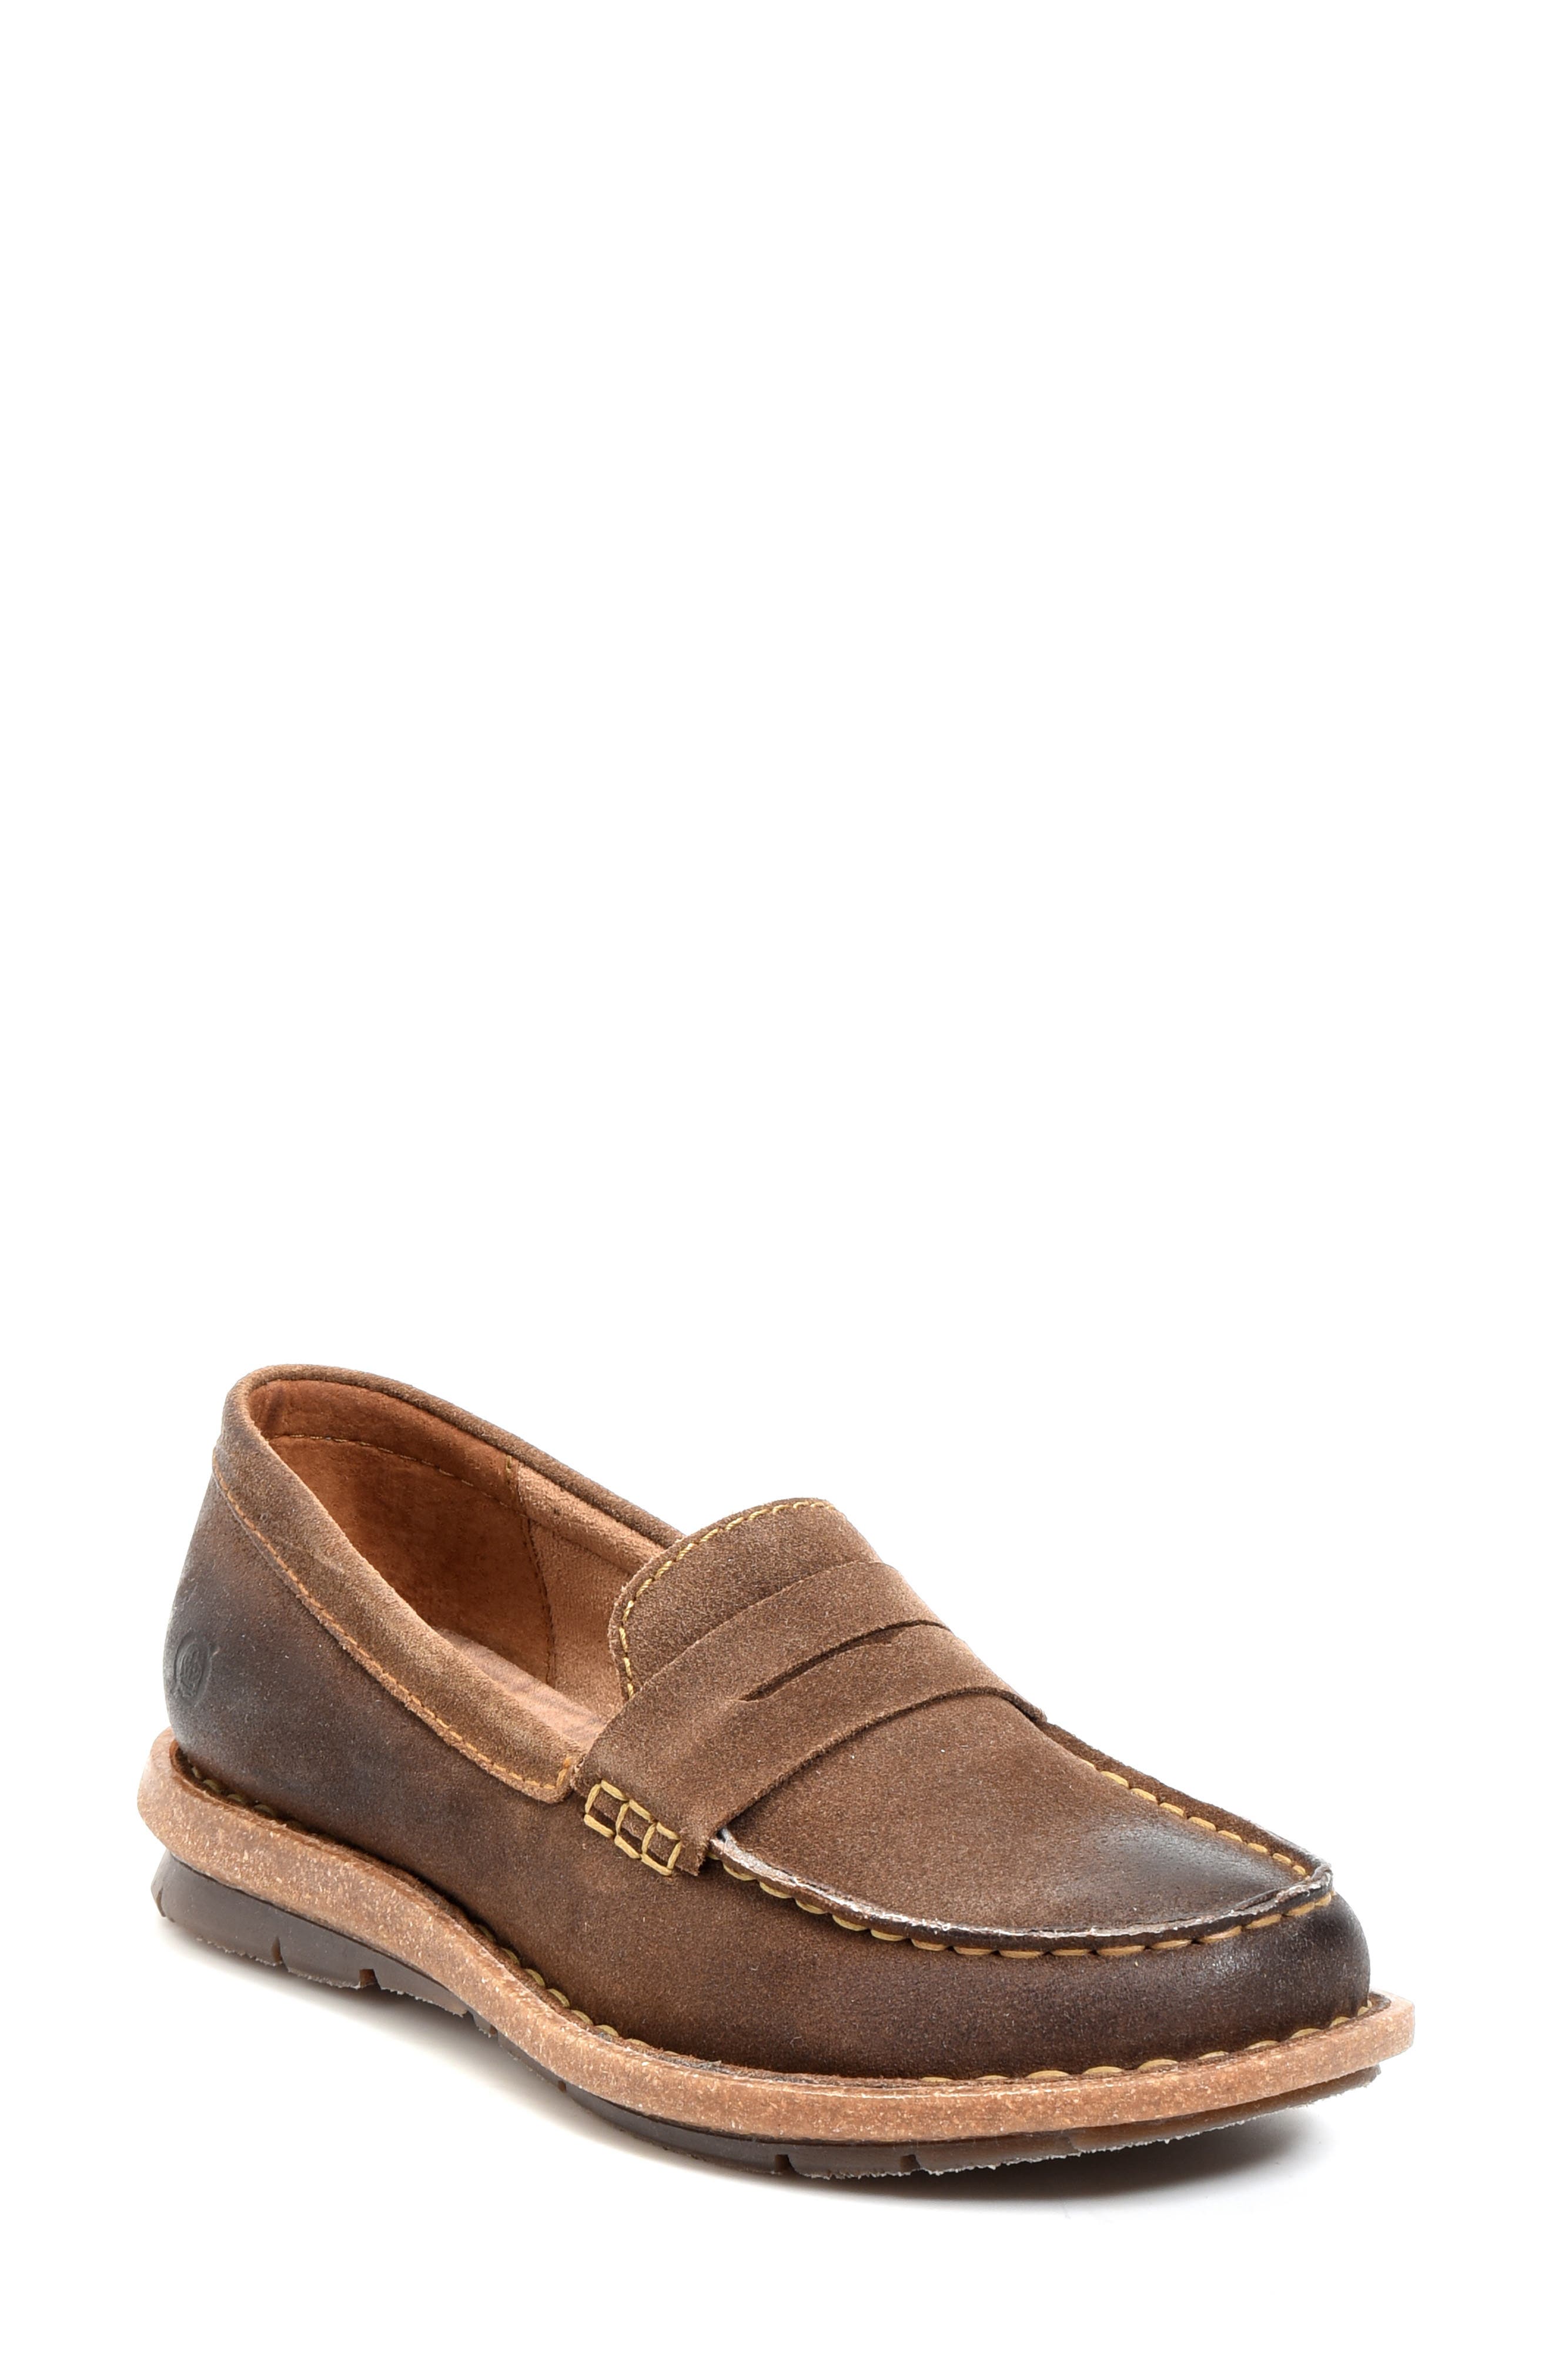 born loafers nordstrom